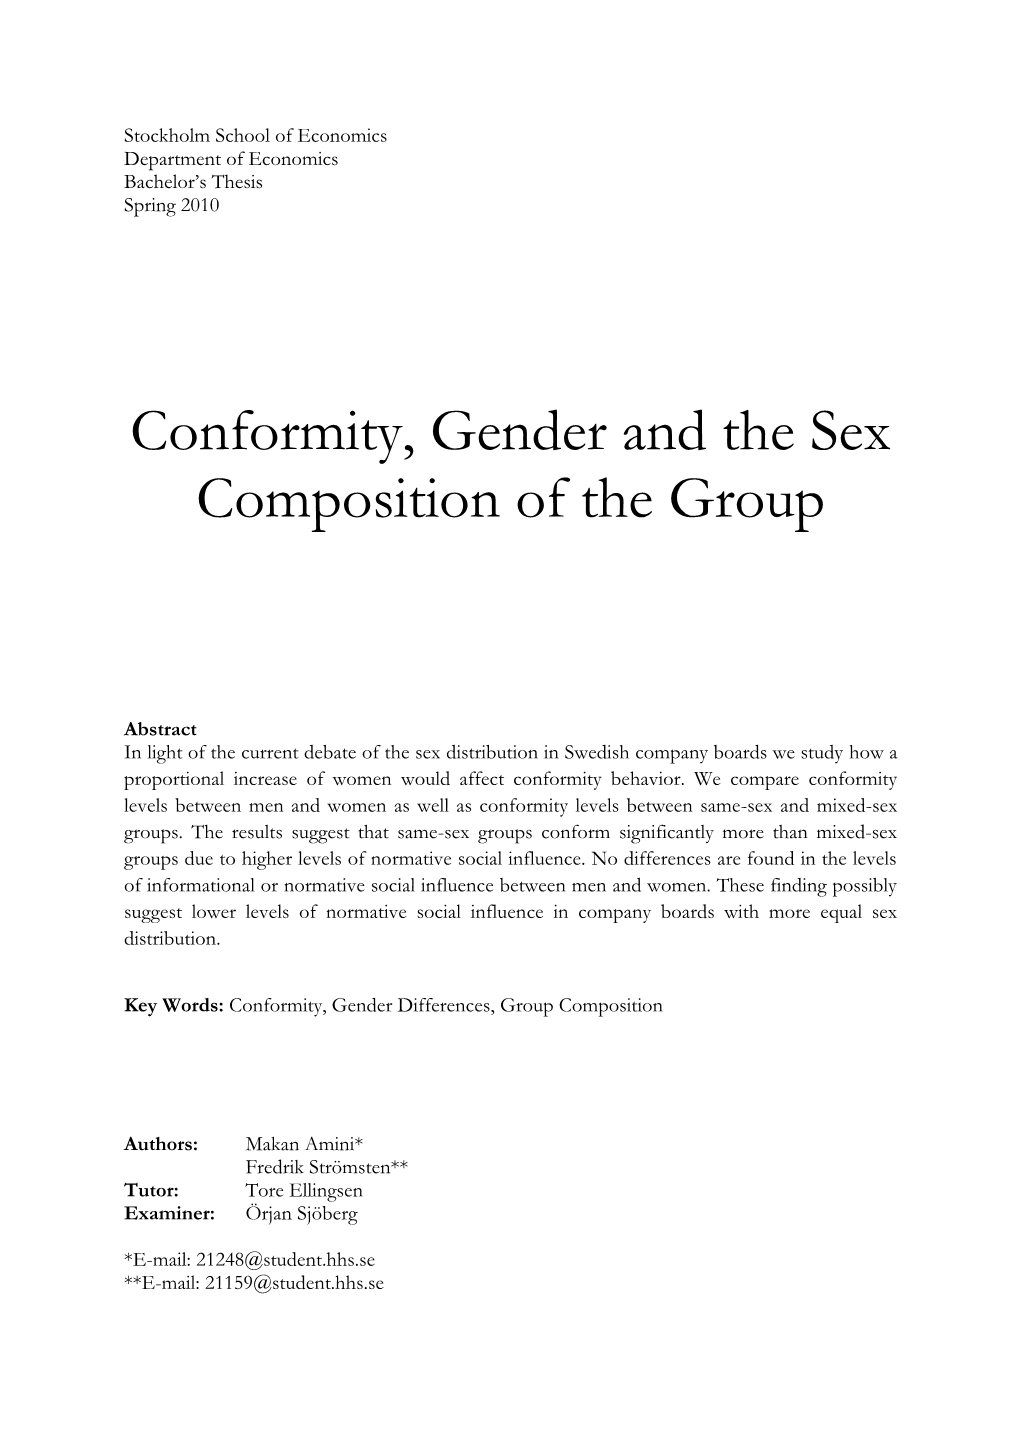 Conformity, Gender and the Sex Composition of the Group